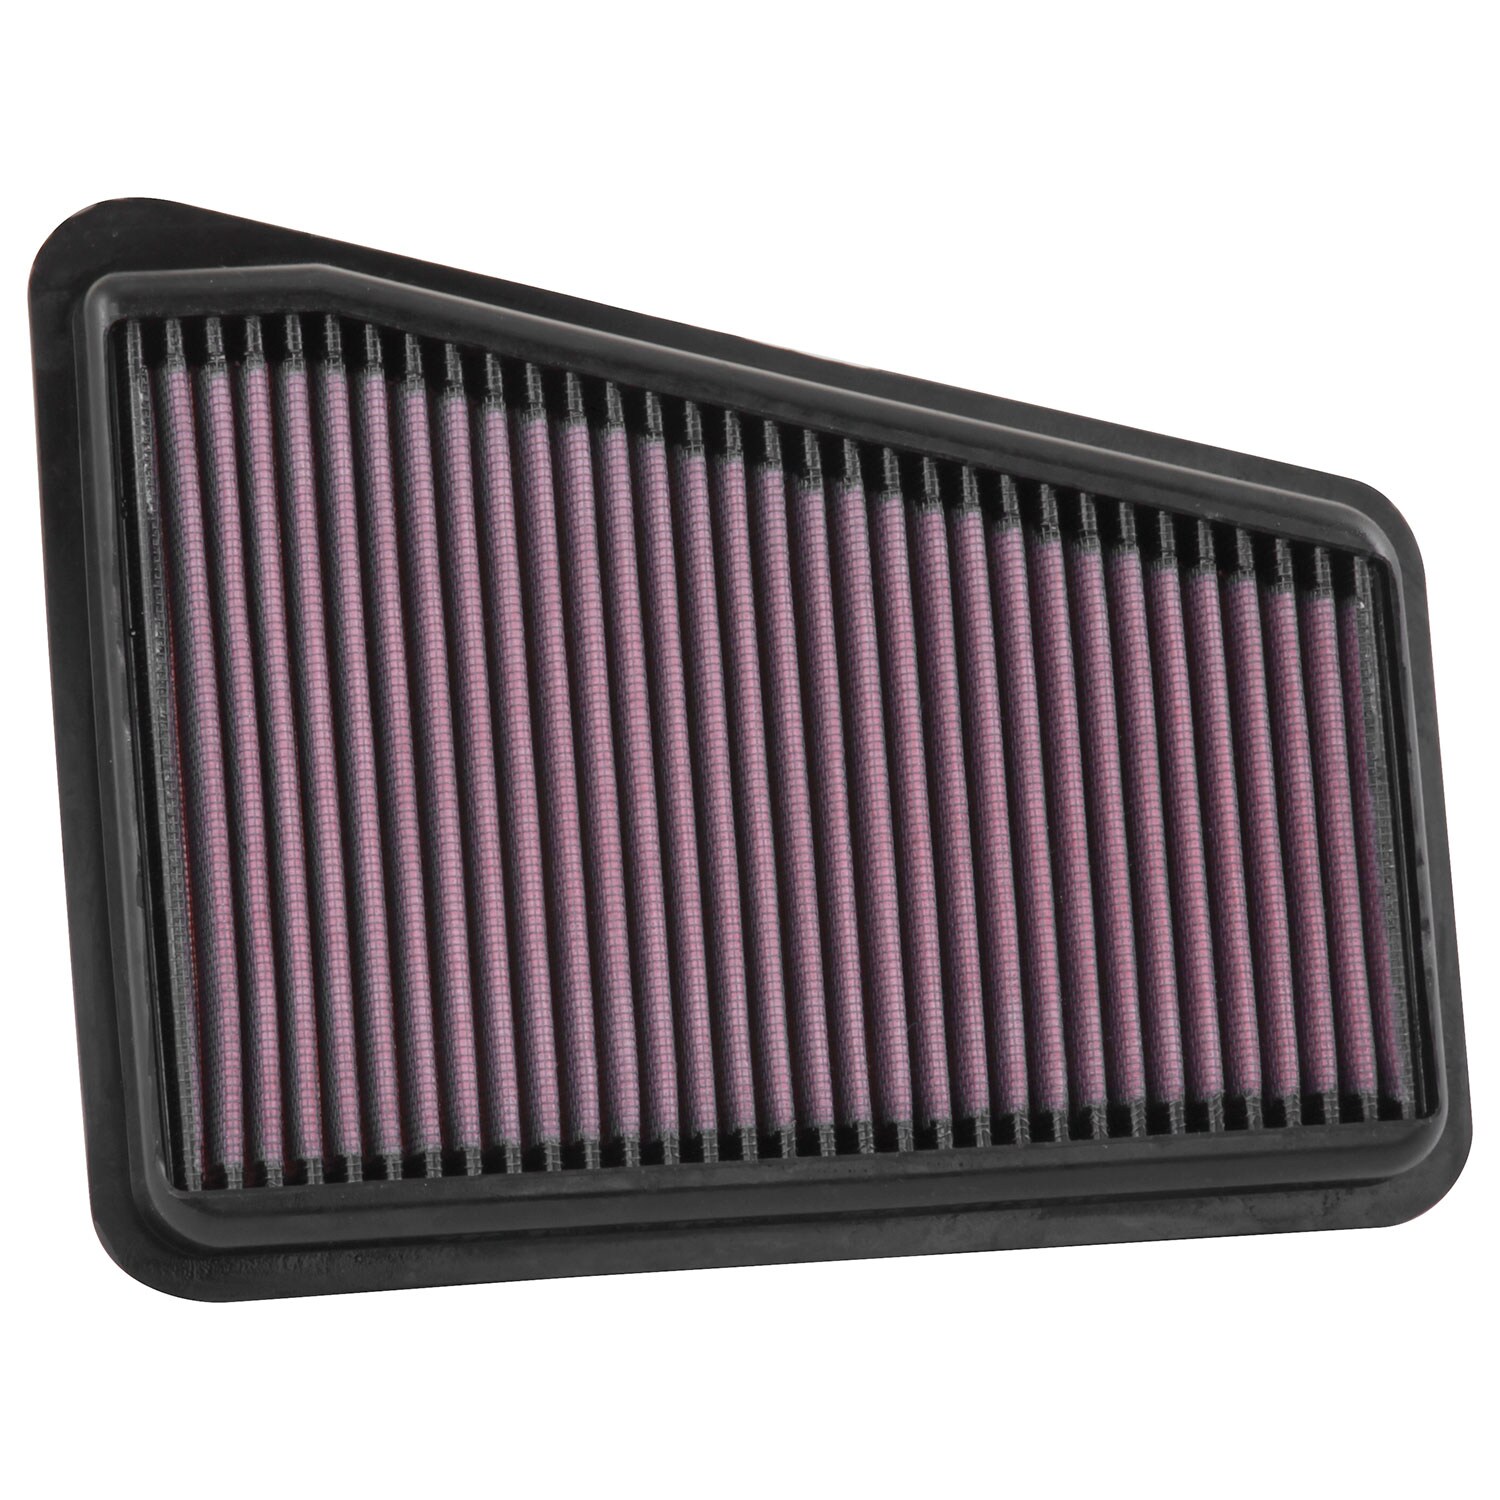  K&N Engine Air Filter: Reusable, Clean Every 75,000 Miles,  Washable, Replacement Car Air Filter: Compatible with 2003-2019  Volswagen/Audi/Seat/Skoda (Beetle, Caddy, Passat, Jetta, Tiguan, Q3),  33-2865 : Automotive